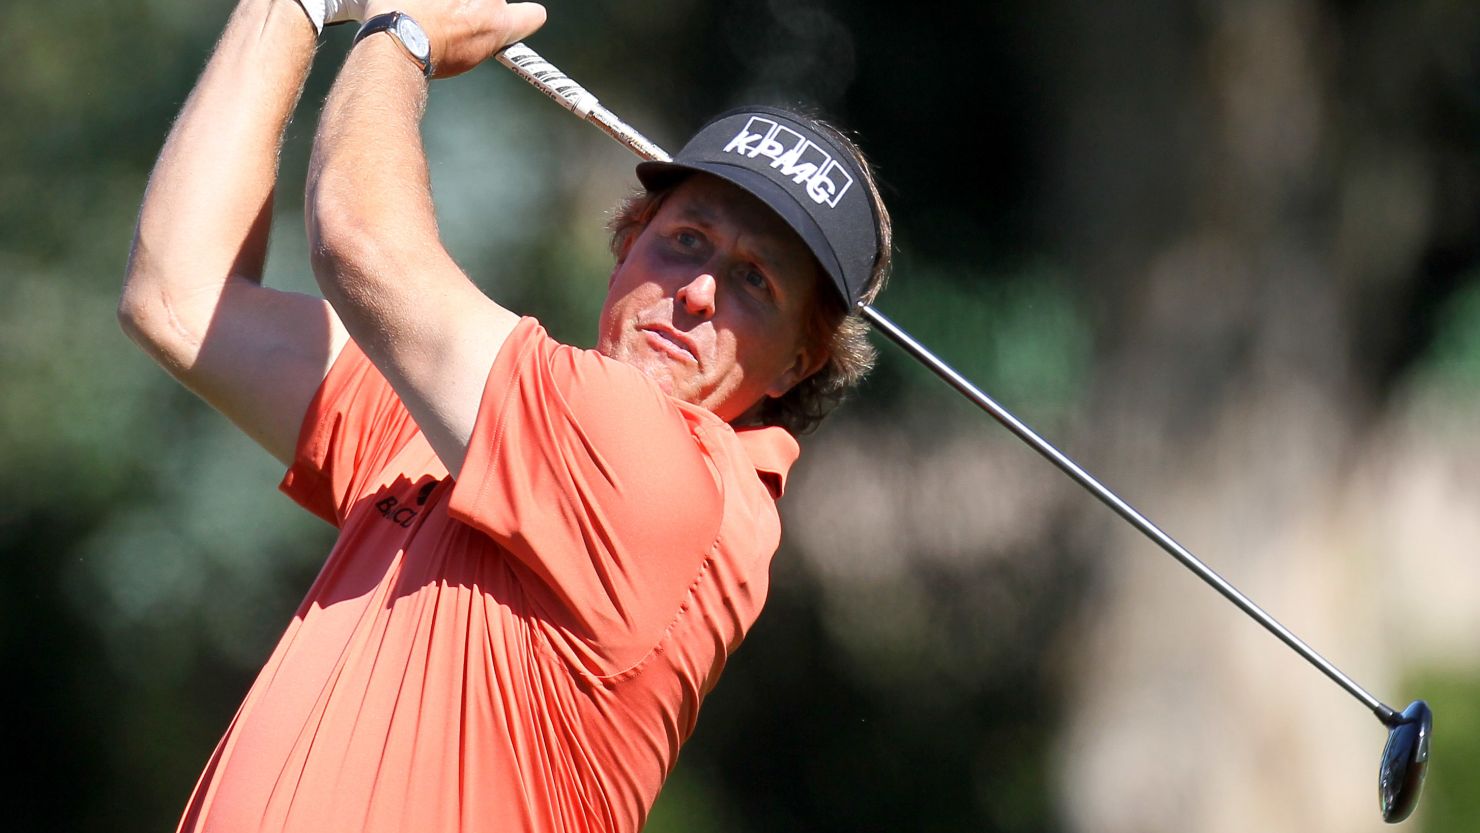 Phil Mickelson has won the Northern Trust Open twice, among his 40 PGA Tour victories.